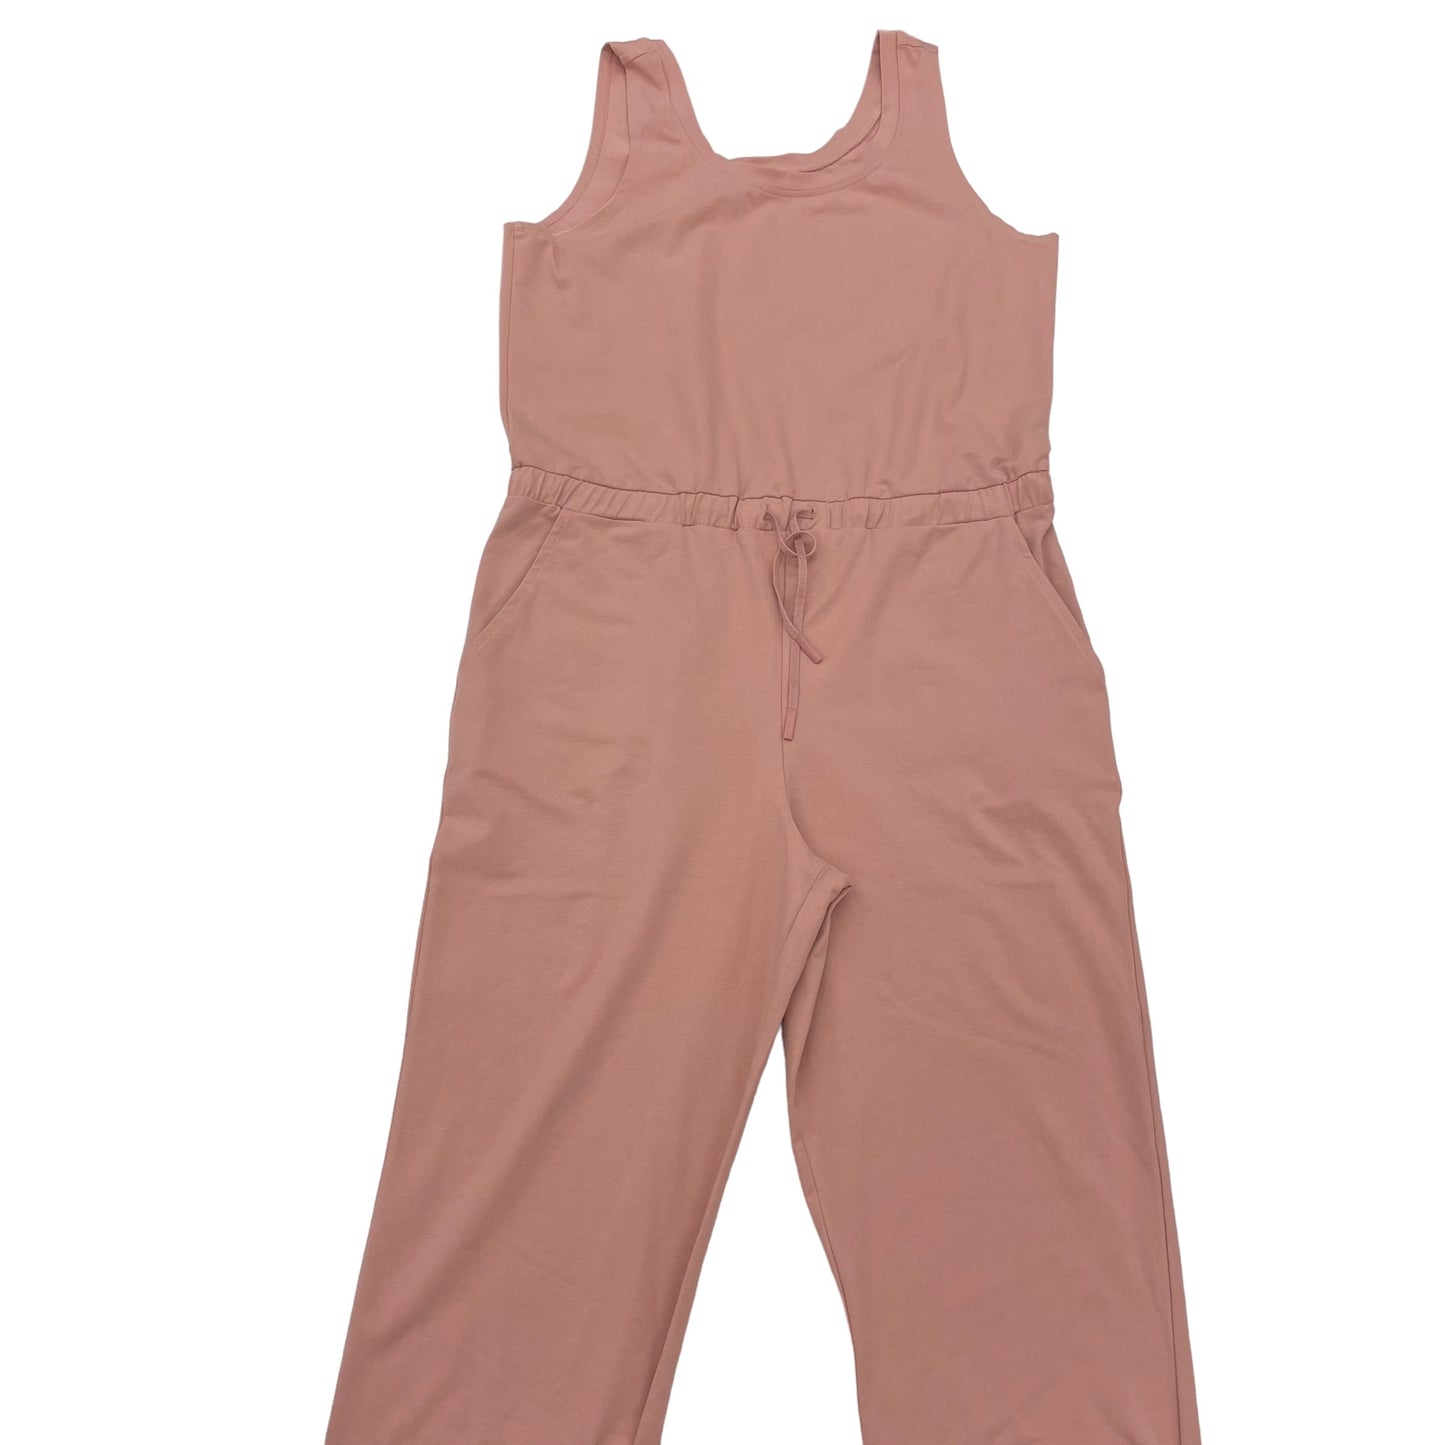 PINK JUMPSUIT by ANDREW MARC Size:L